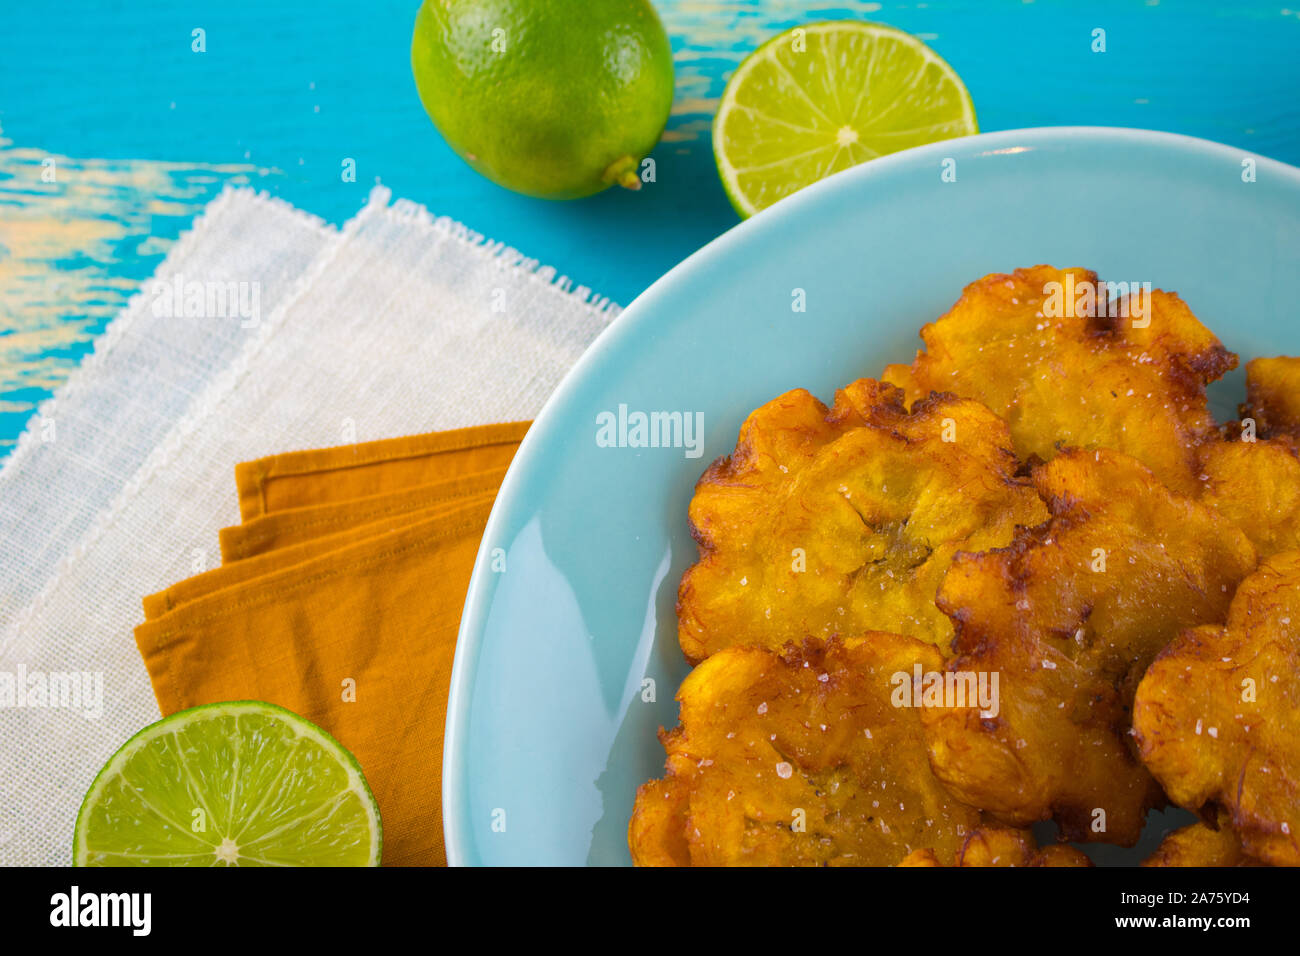 Food photography of a blue plate with deep fried plantains Latin American tostones or patacones with limes. Stock Photo